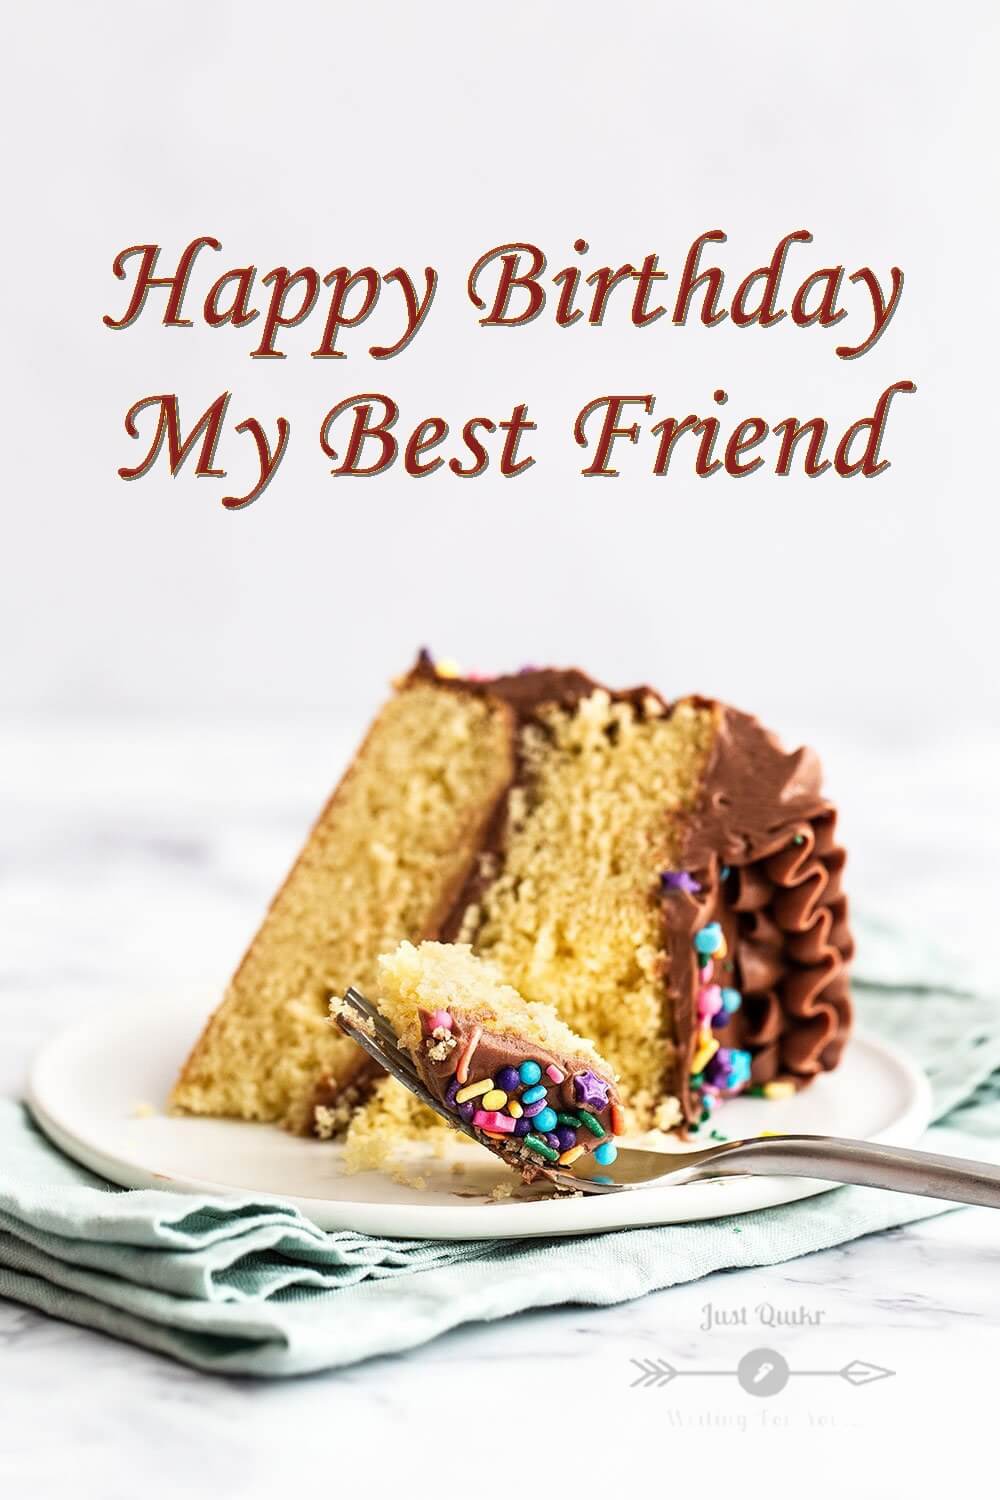 TOP 6: Happy Birthday Shayari HD Pics Images for My Best Friend ...